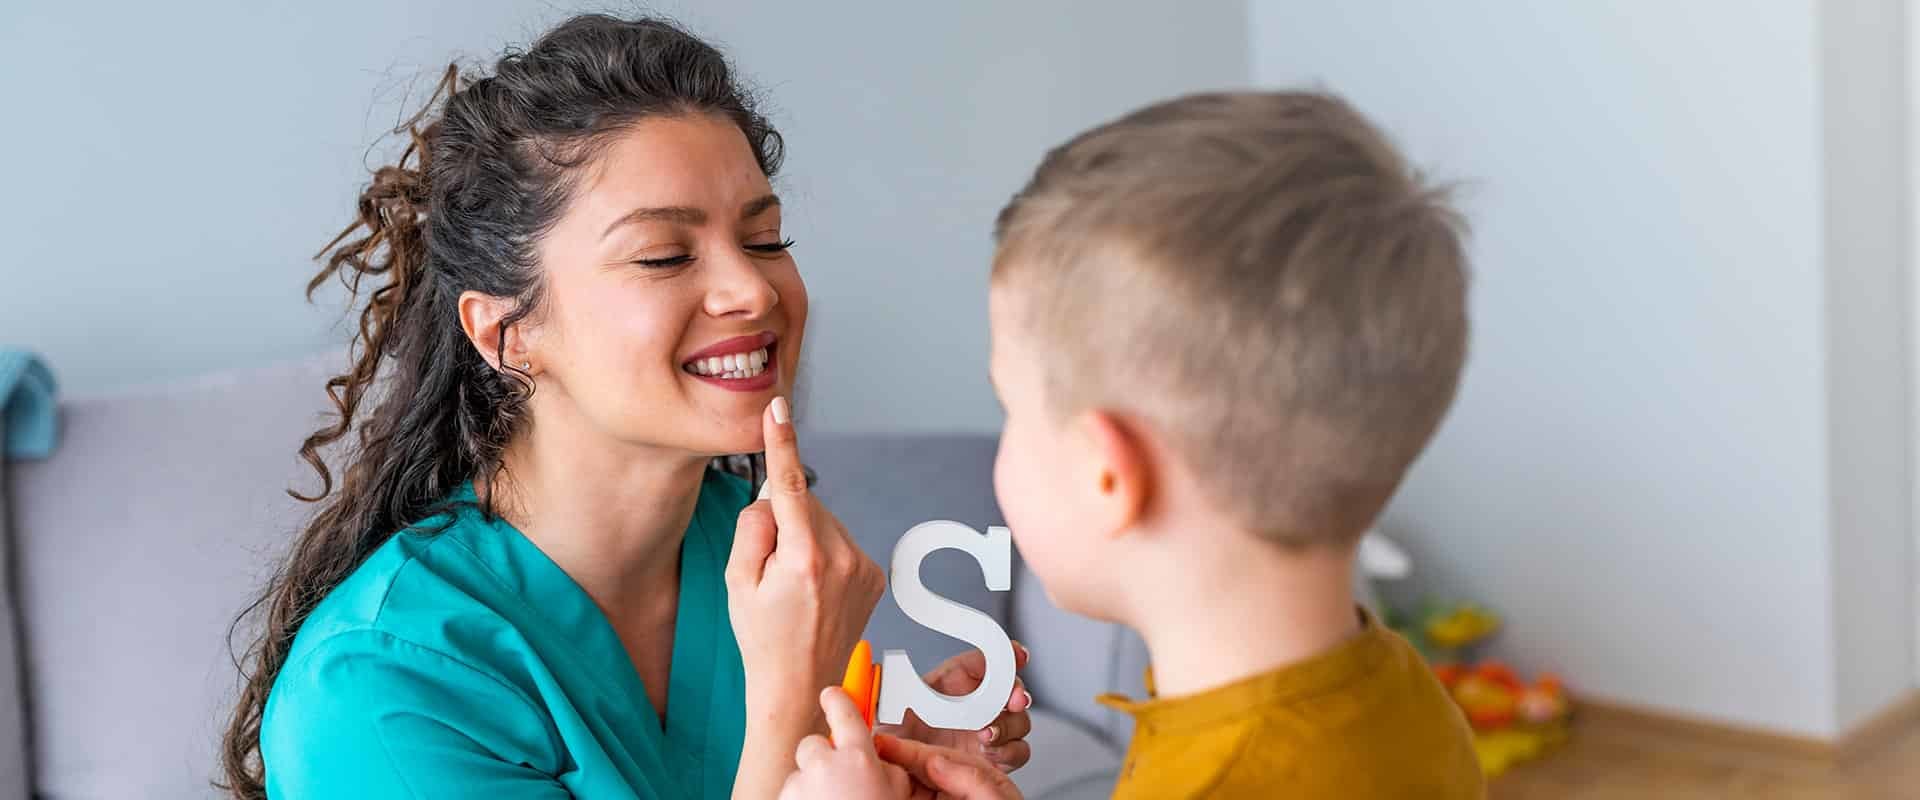 What skills are needed to be a speech pathologist?